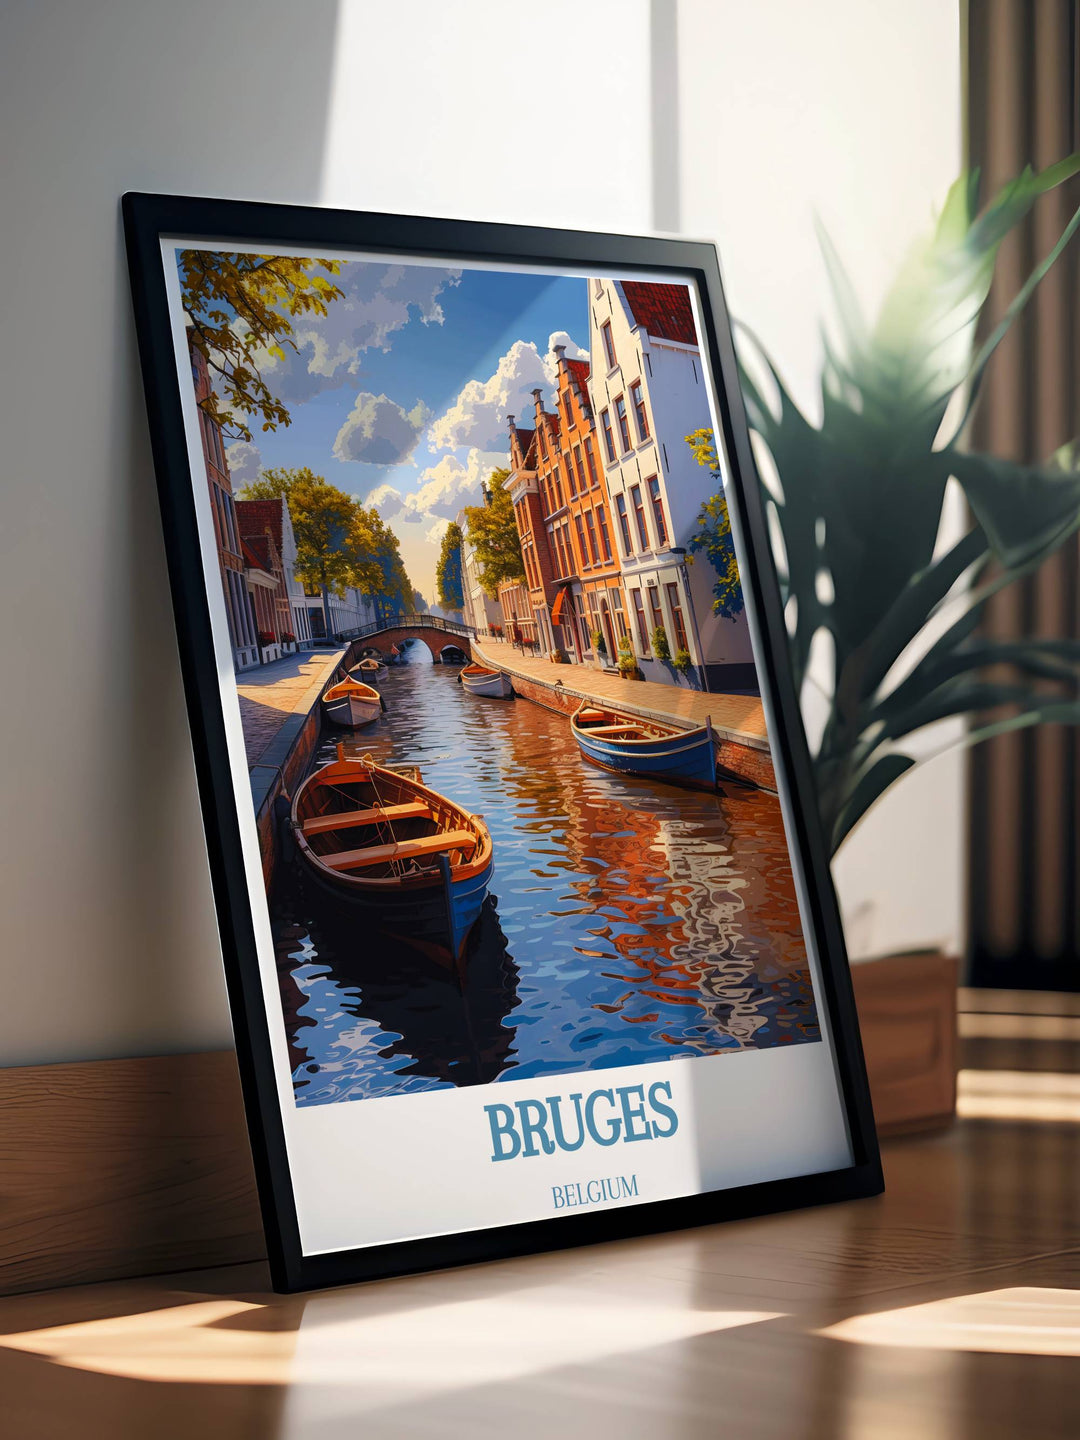 Detailed artistic print of the Canal of Bruges with autumn colors reflecting on calm waters, enhancing any gallery wall